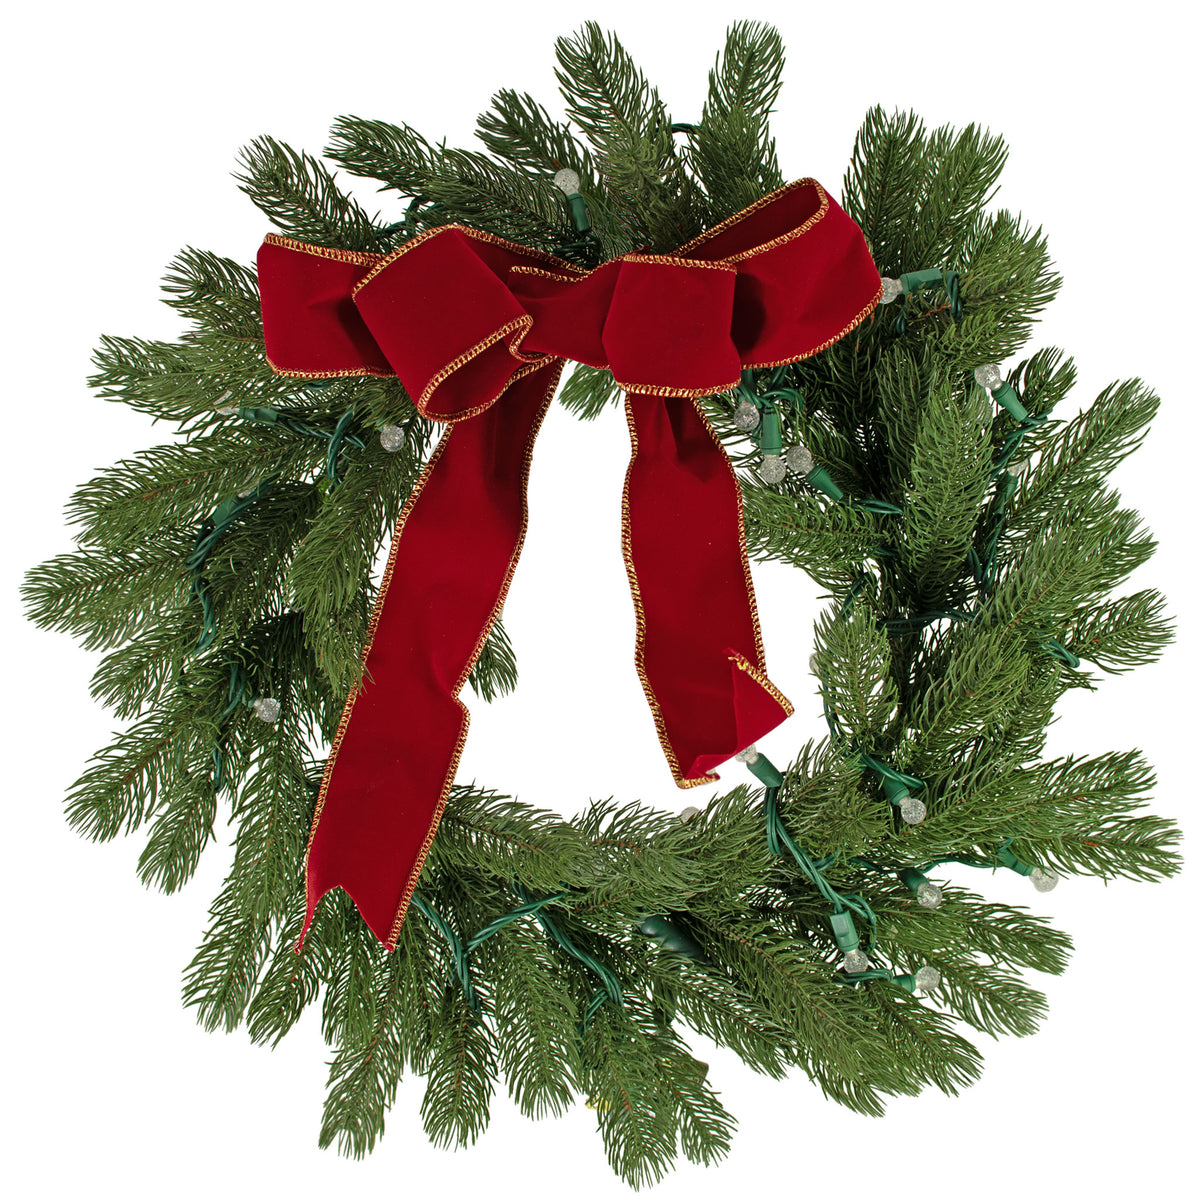 Introducing Lee Display's brand-new Pre-Decorated Pre-Lit Pine Needle Christmas Wreath with a Red Velvet Bow!